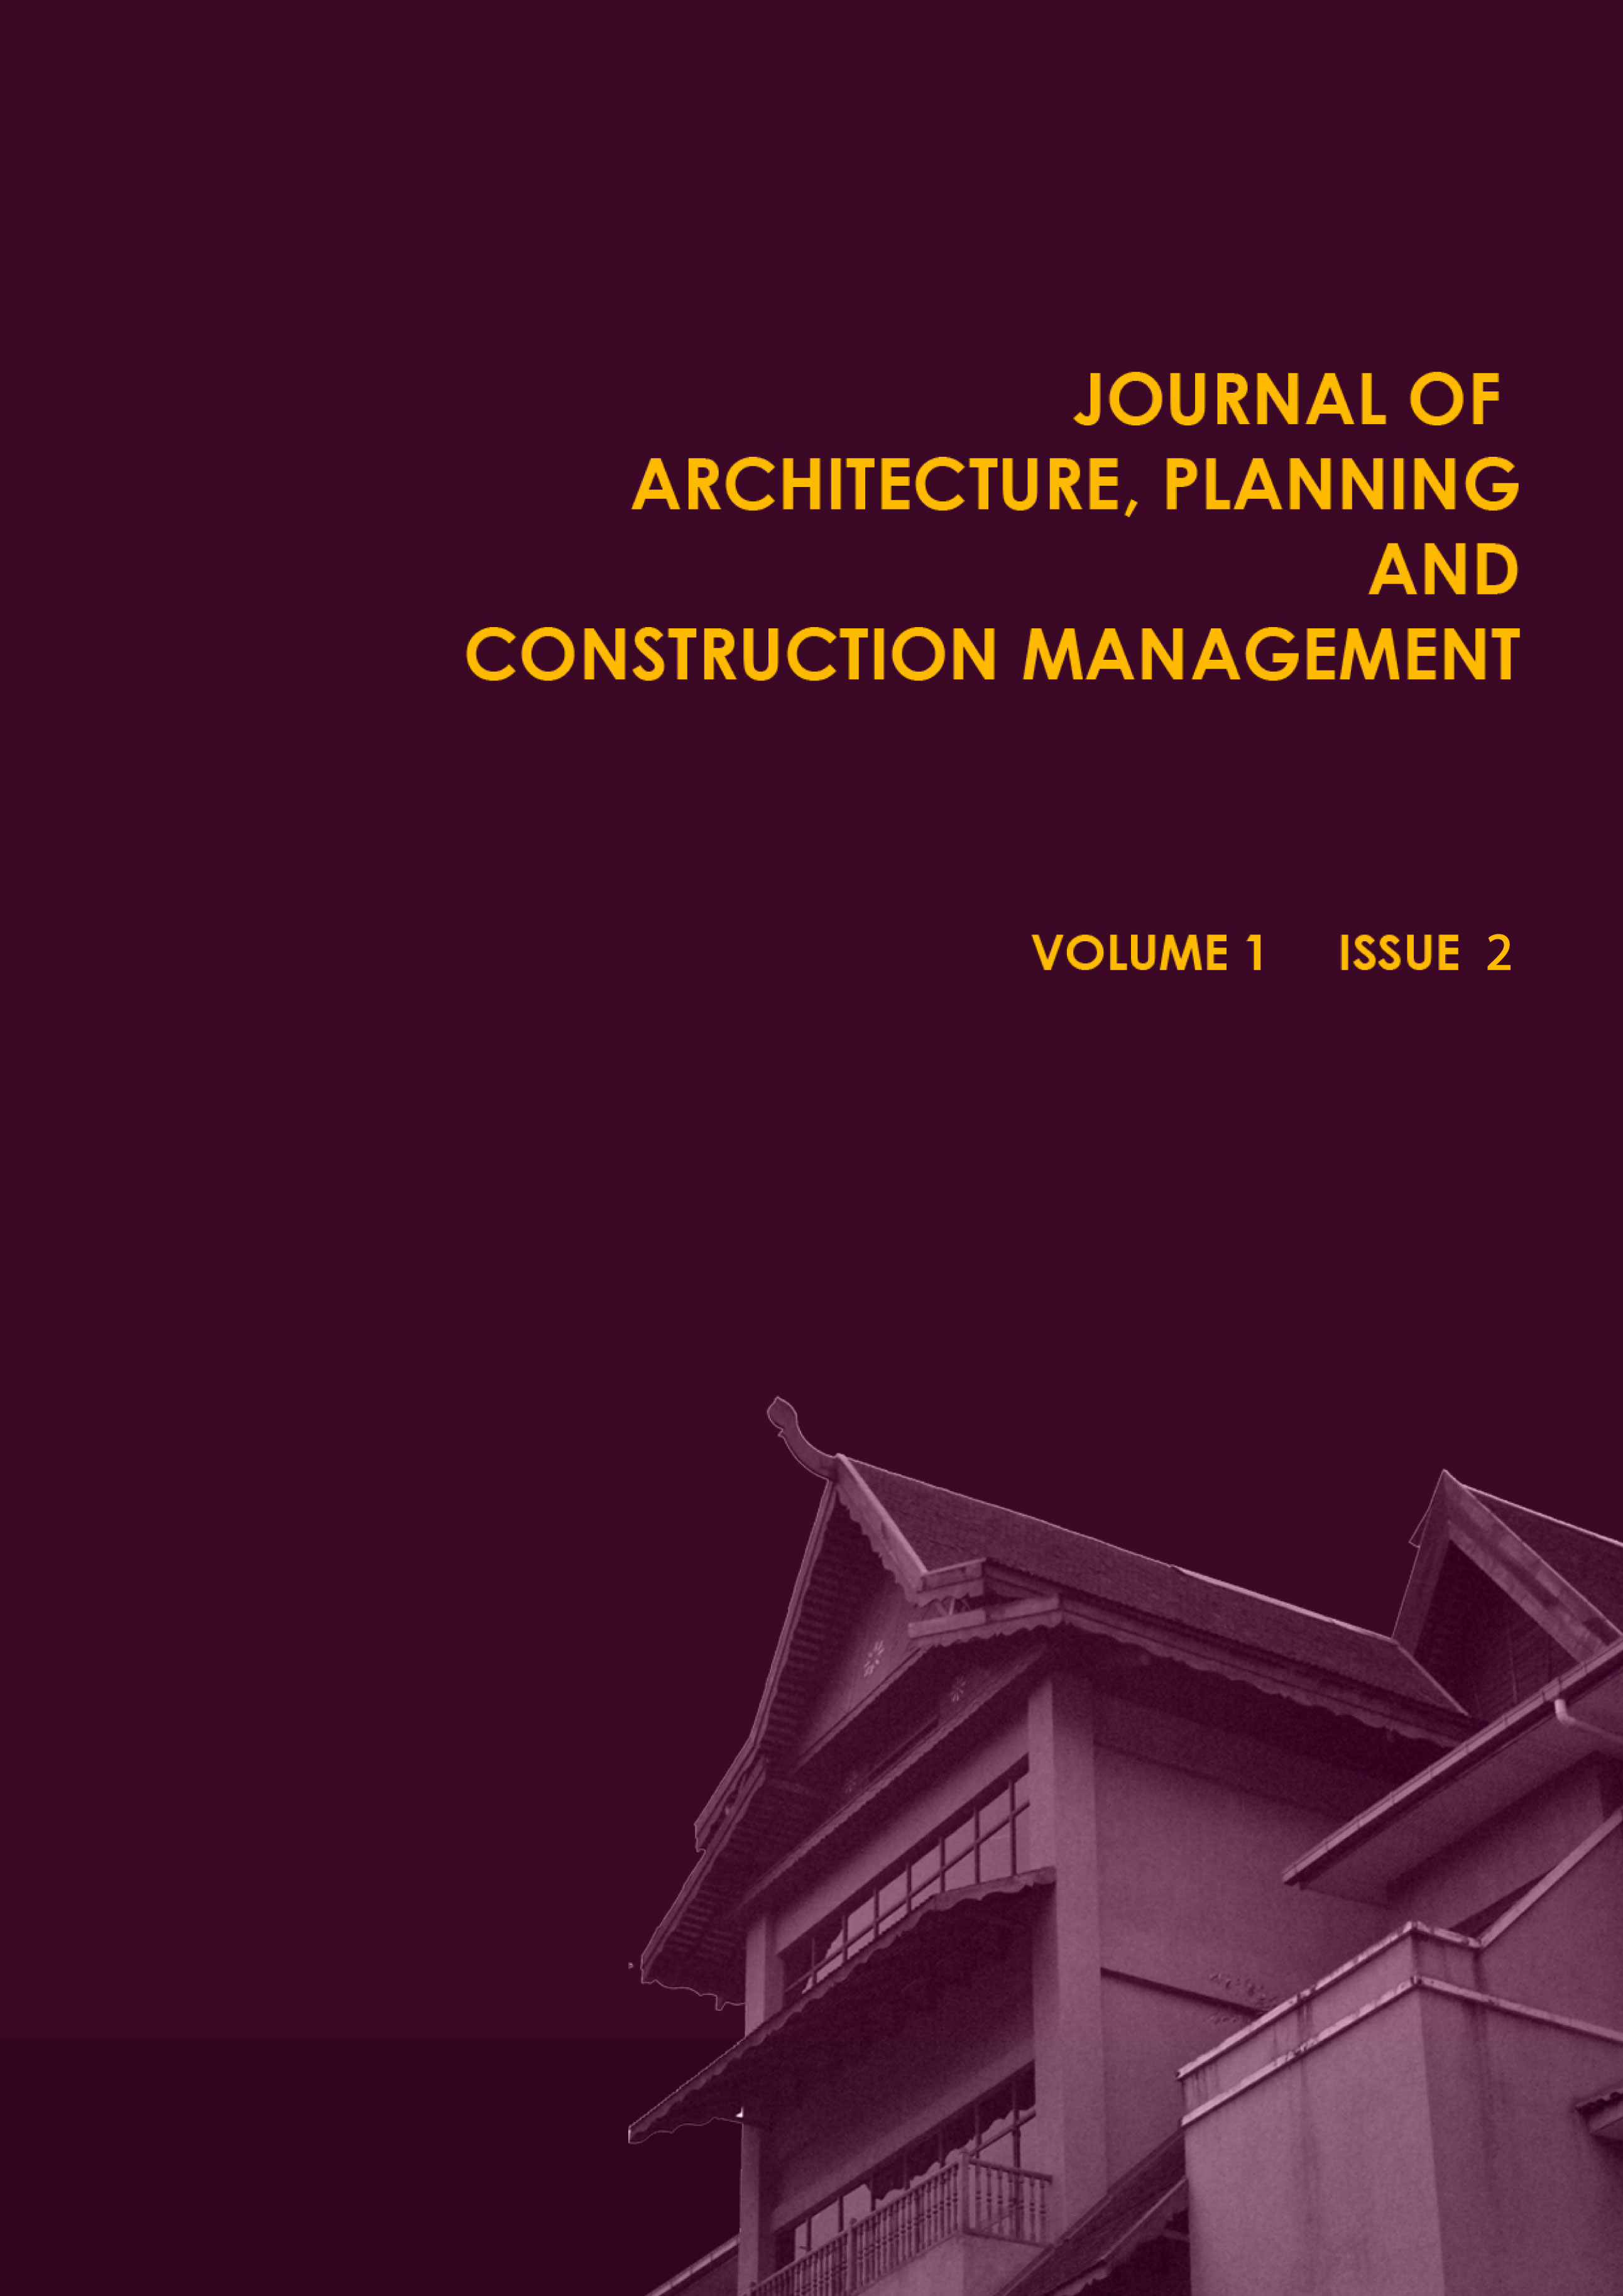 					View Vol. 1 No. 2 (2011): Journal of Architecture, Planning and Construction Management (JAPCM)
				